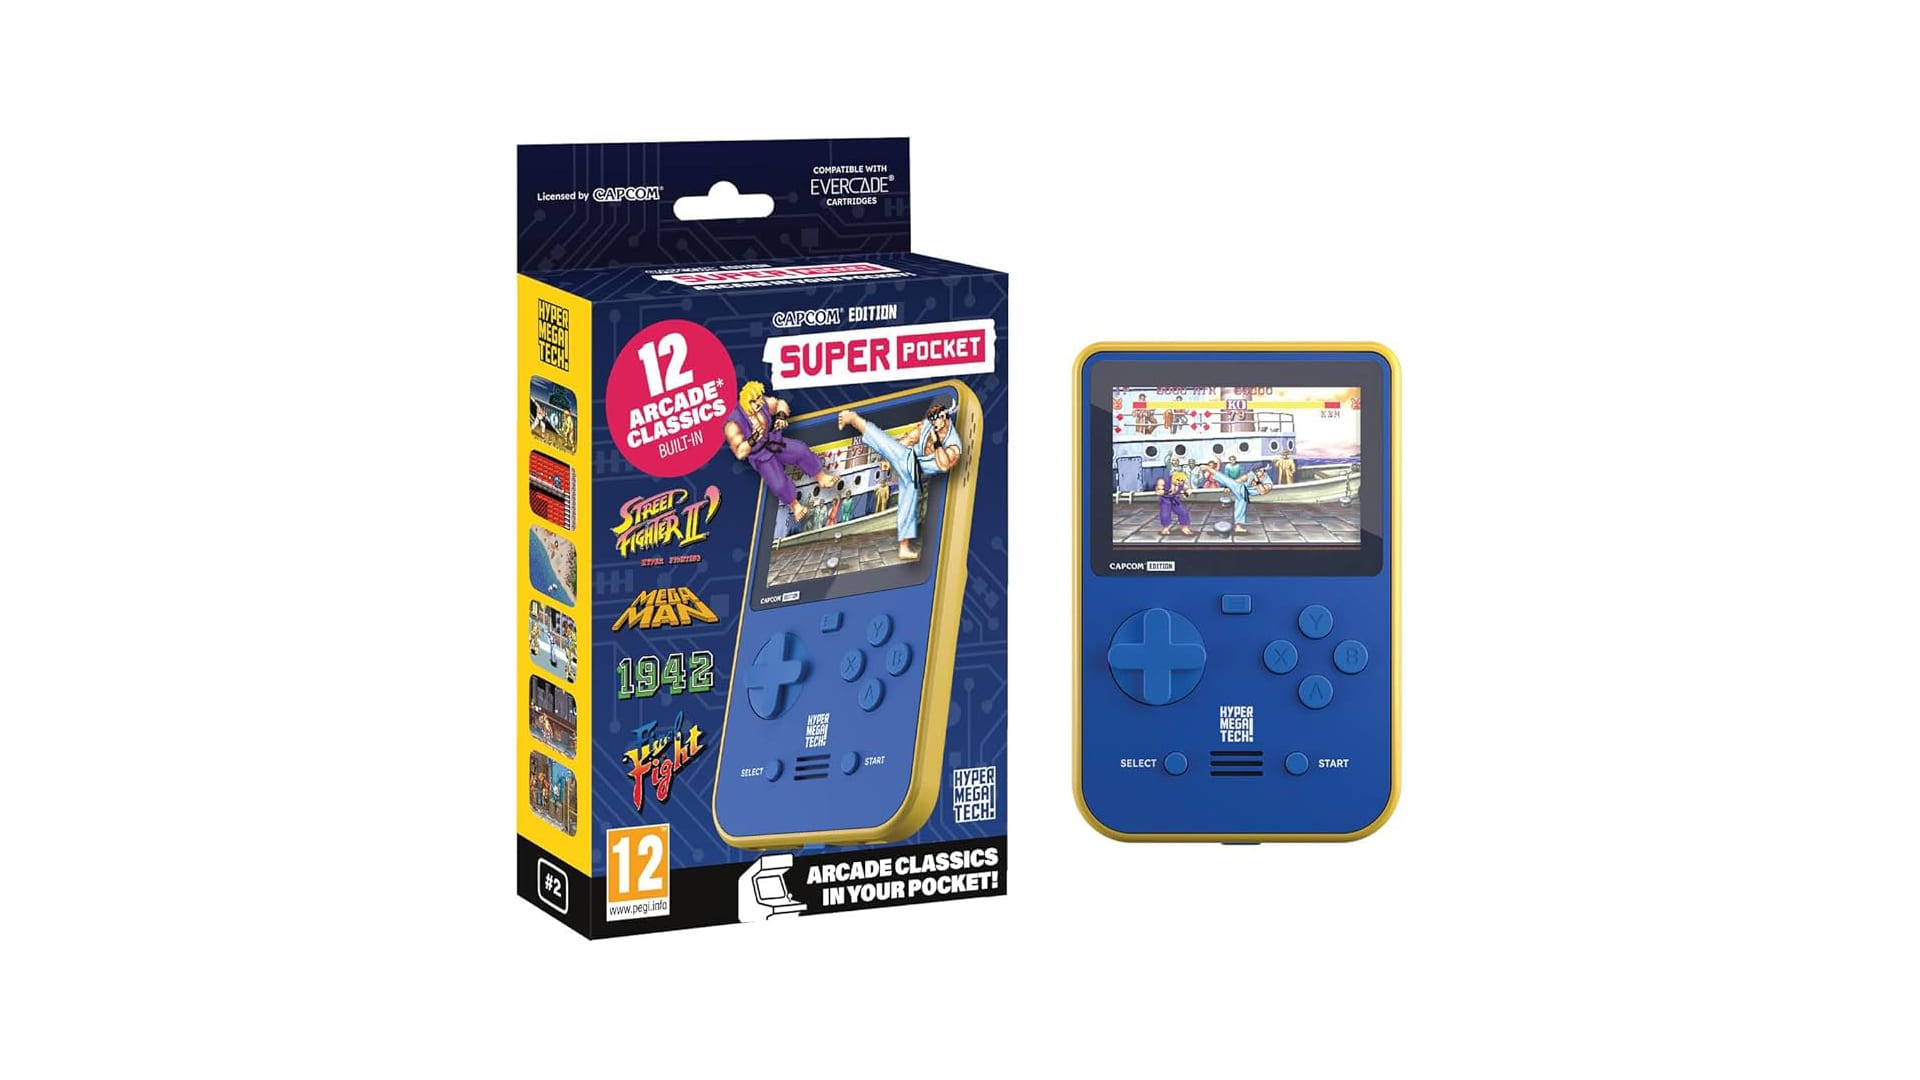 Packaging of the Super Pocket Console highlighting its retro gaming capabilities